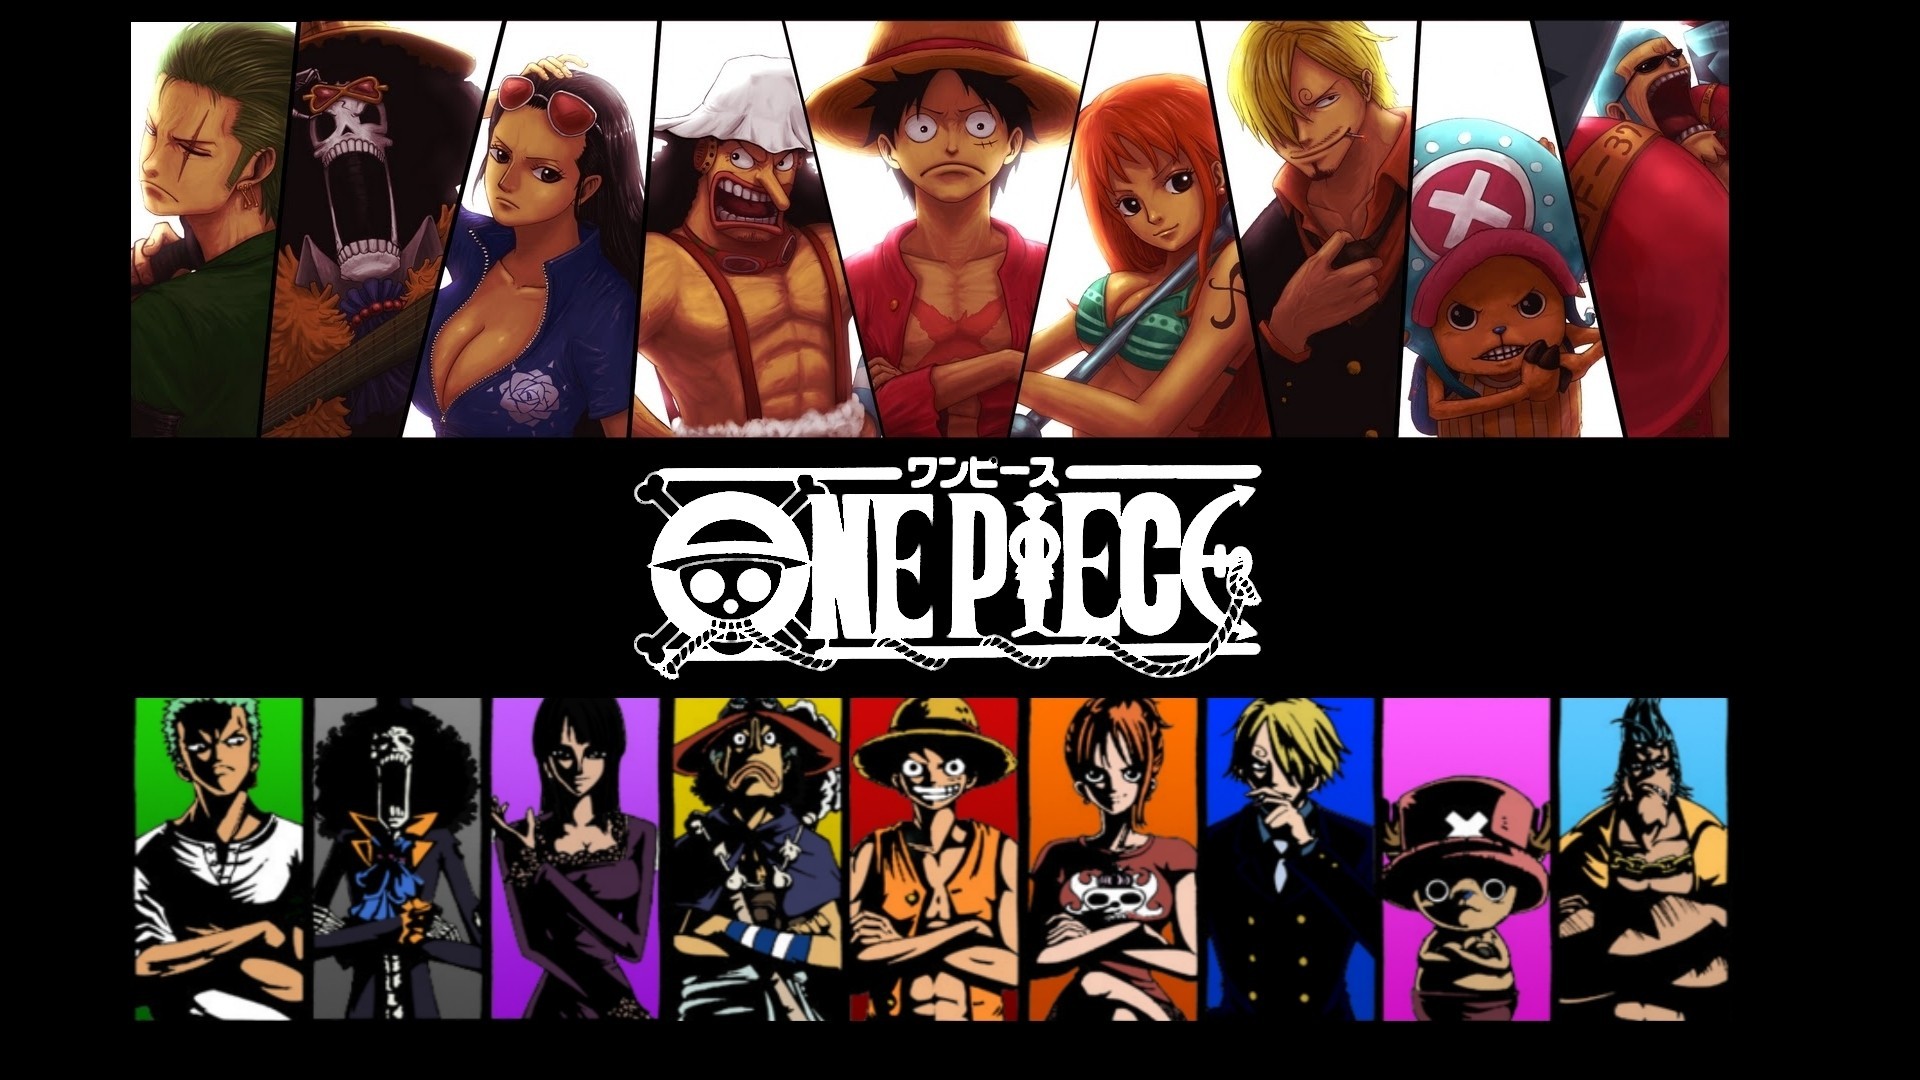 One Piece Crew Images HD Wallpaper of Anime   hdwallpaper2013com